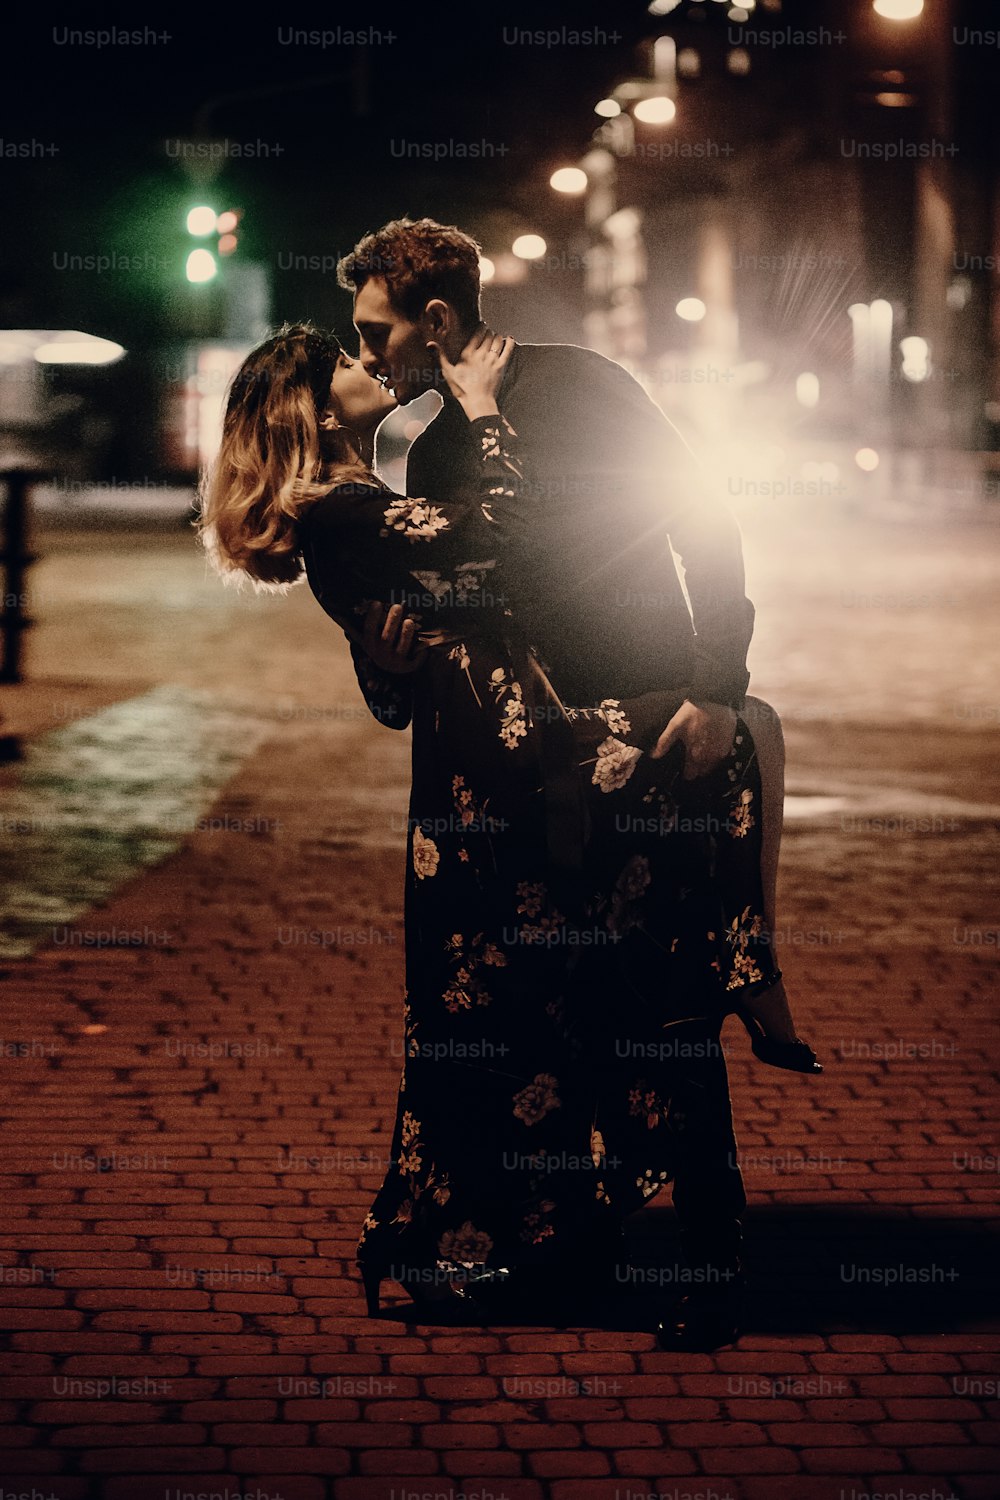 passionate lovers kissing in evening city street under lantern. stylish couple in love embracing in city lights. modern woman and man romantic french atmospheric moment.